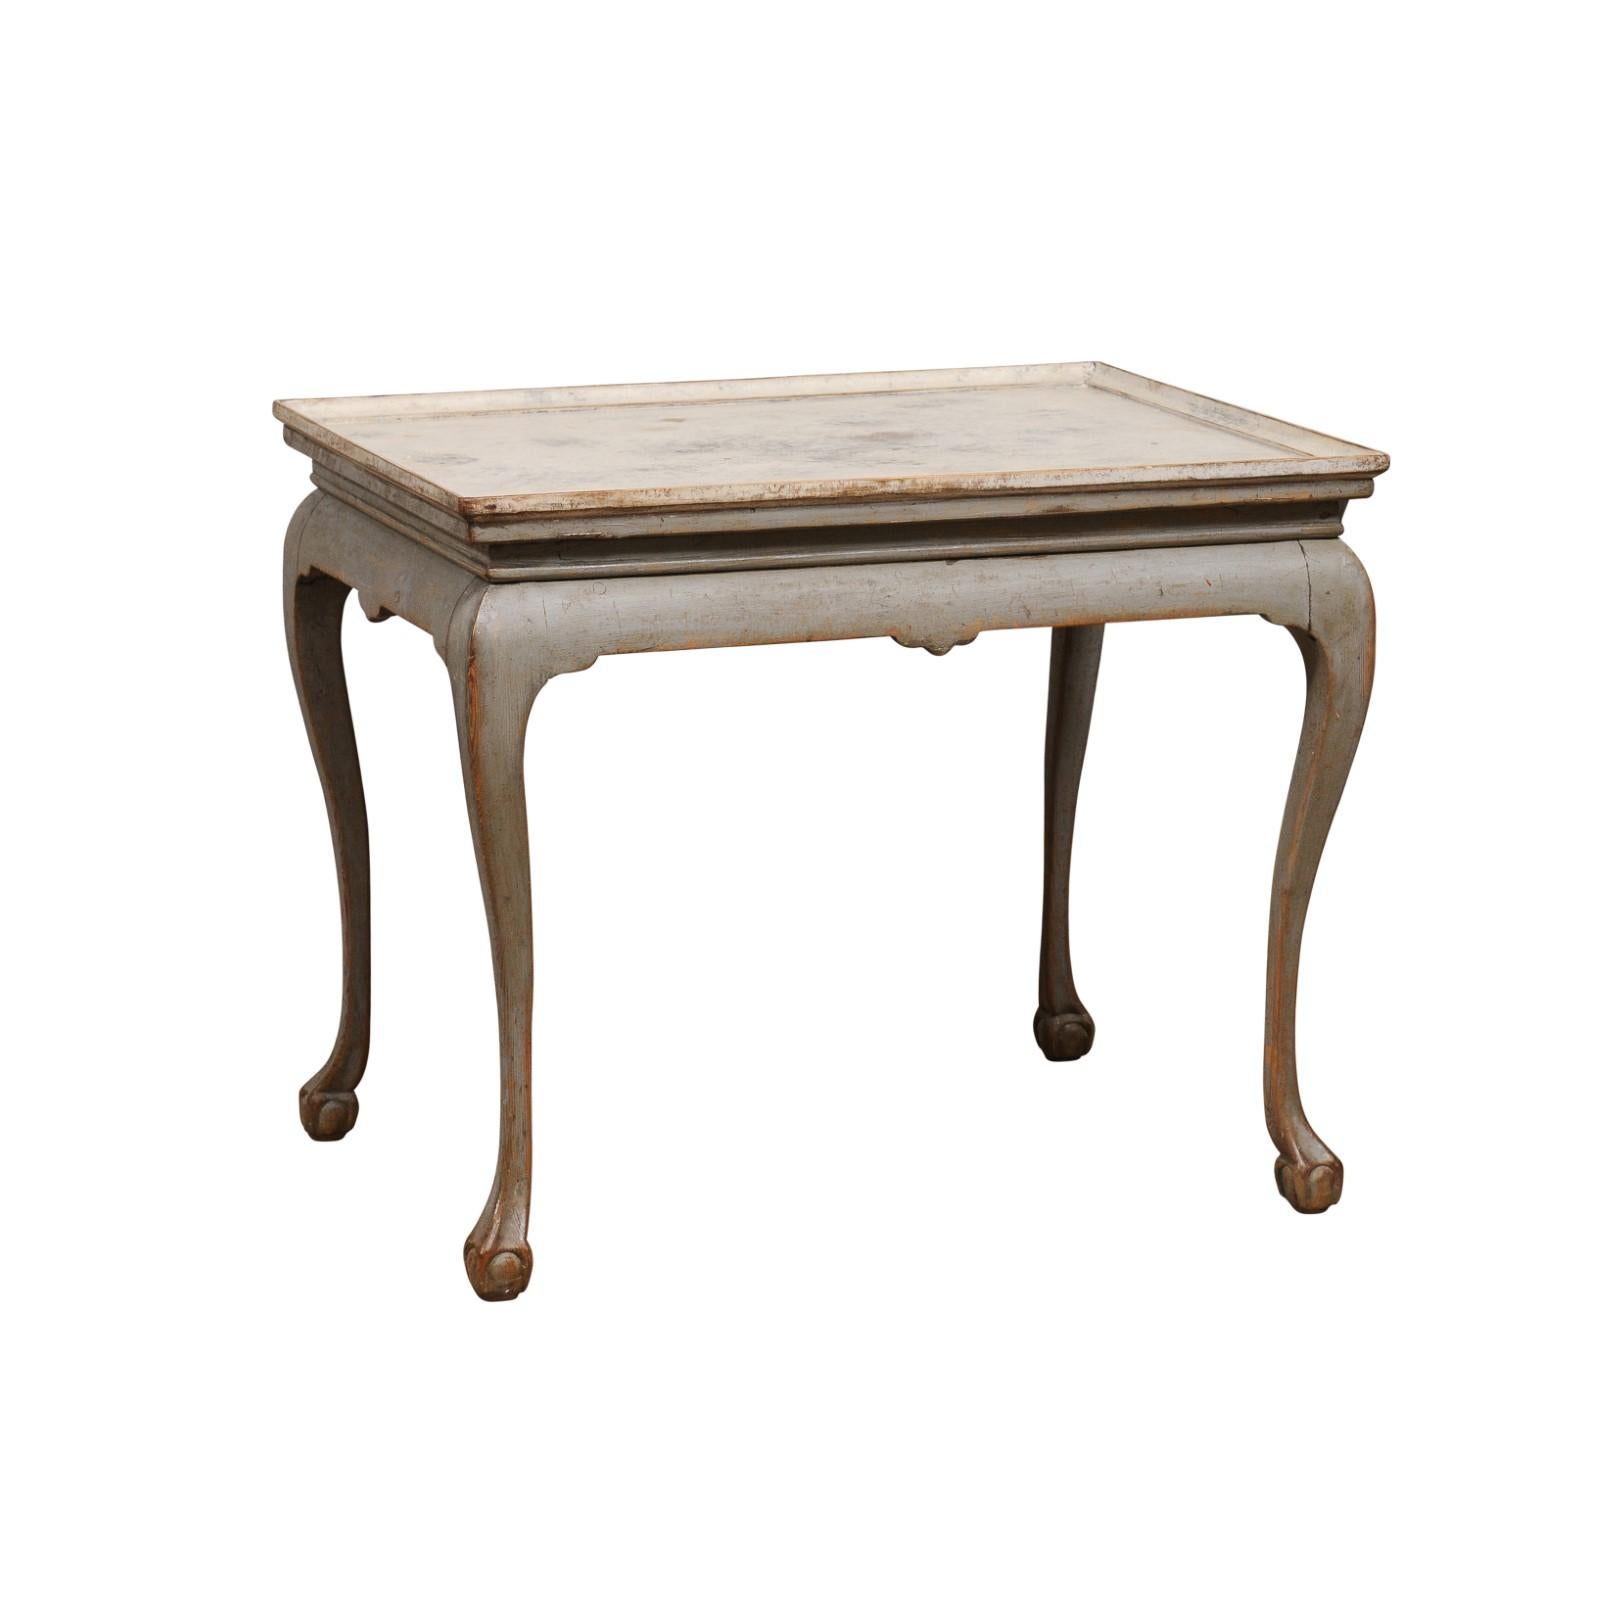 1750s Swedish Rococo Gray Painted Tea Table with Tray Top and Ball and Claw Feet For Sale 1